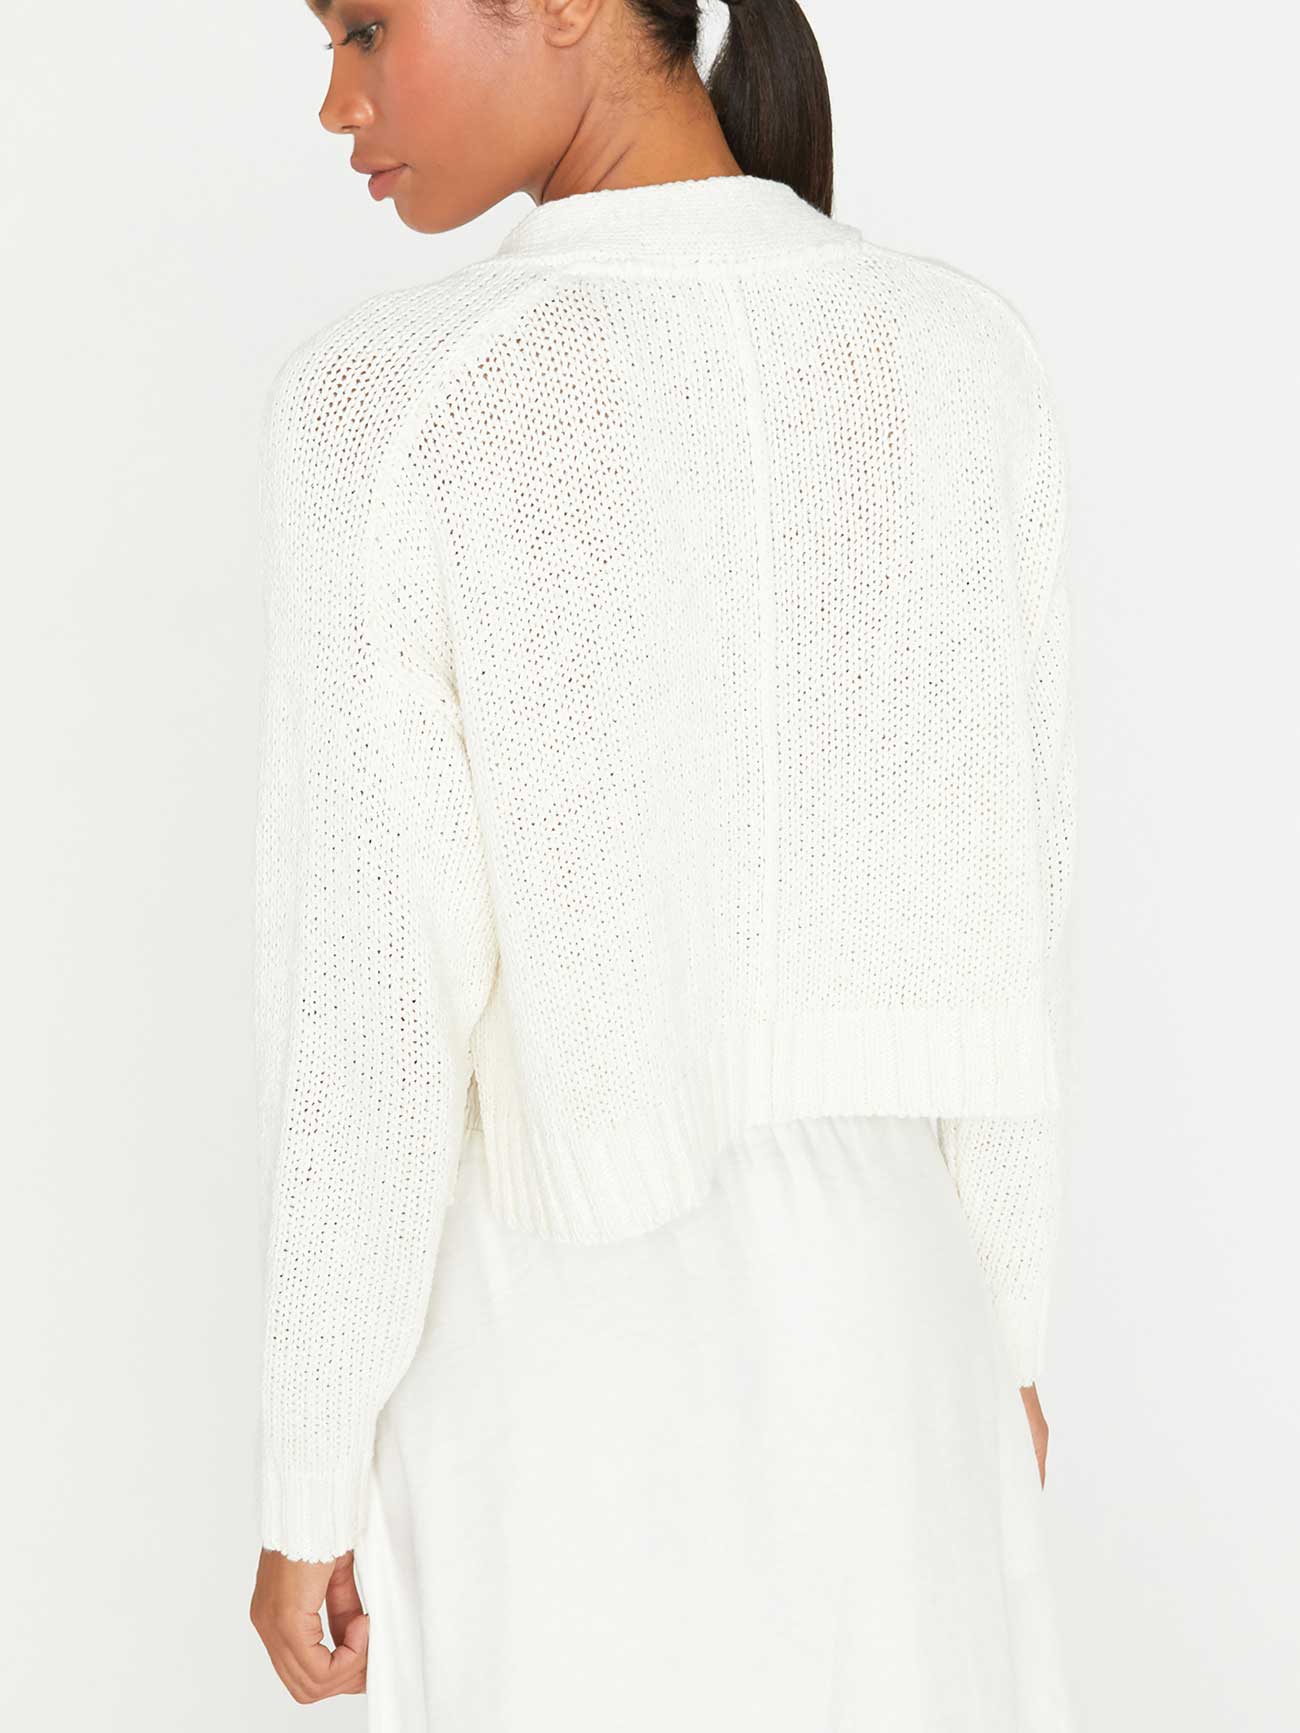 Cropped white linen cotton cardigan sweater back view